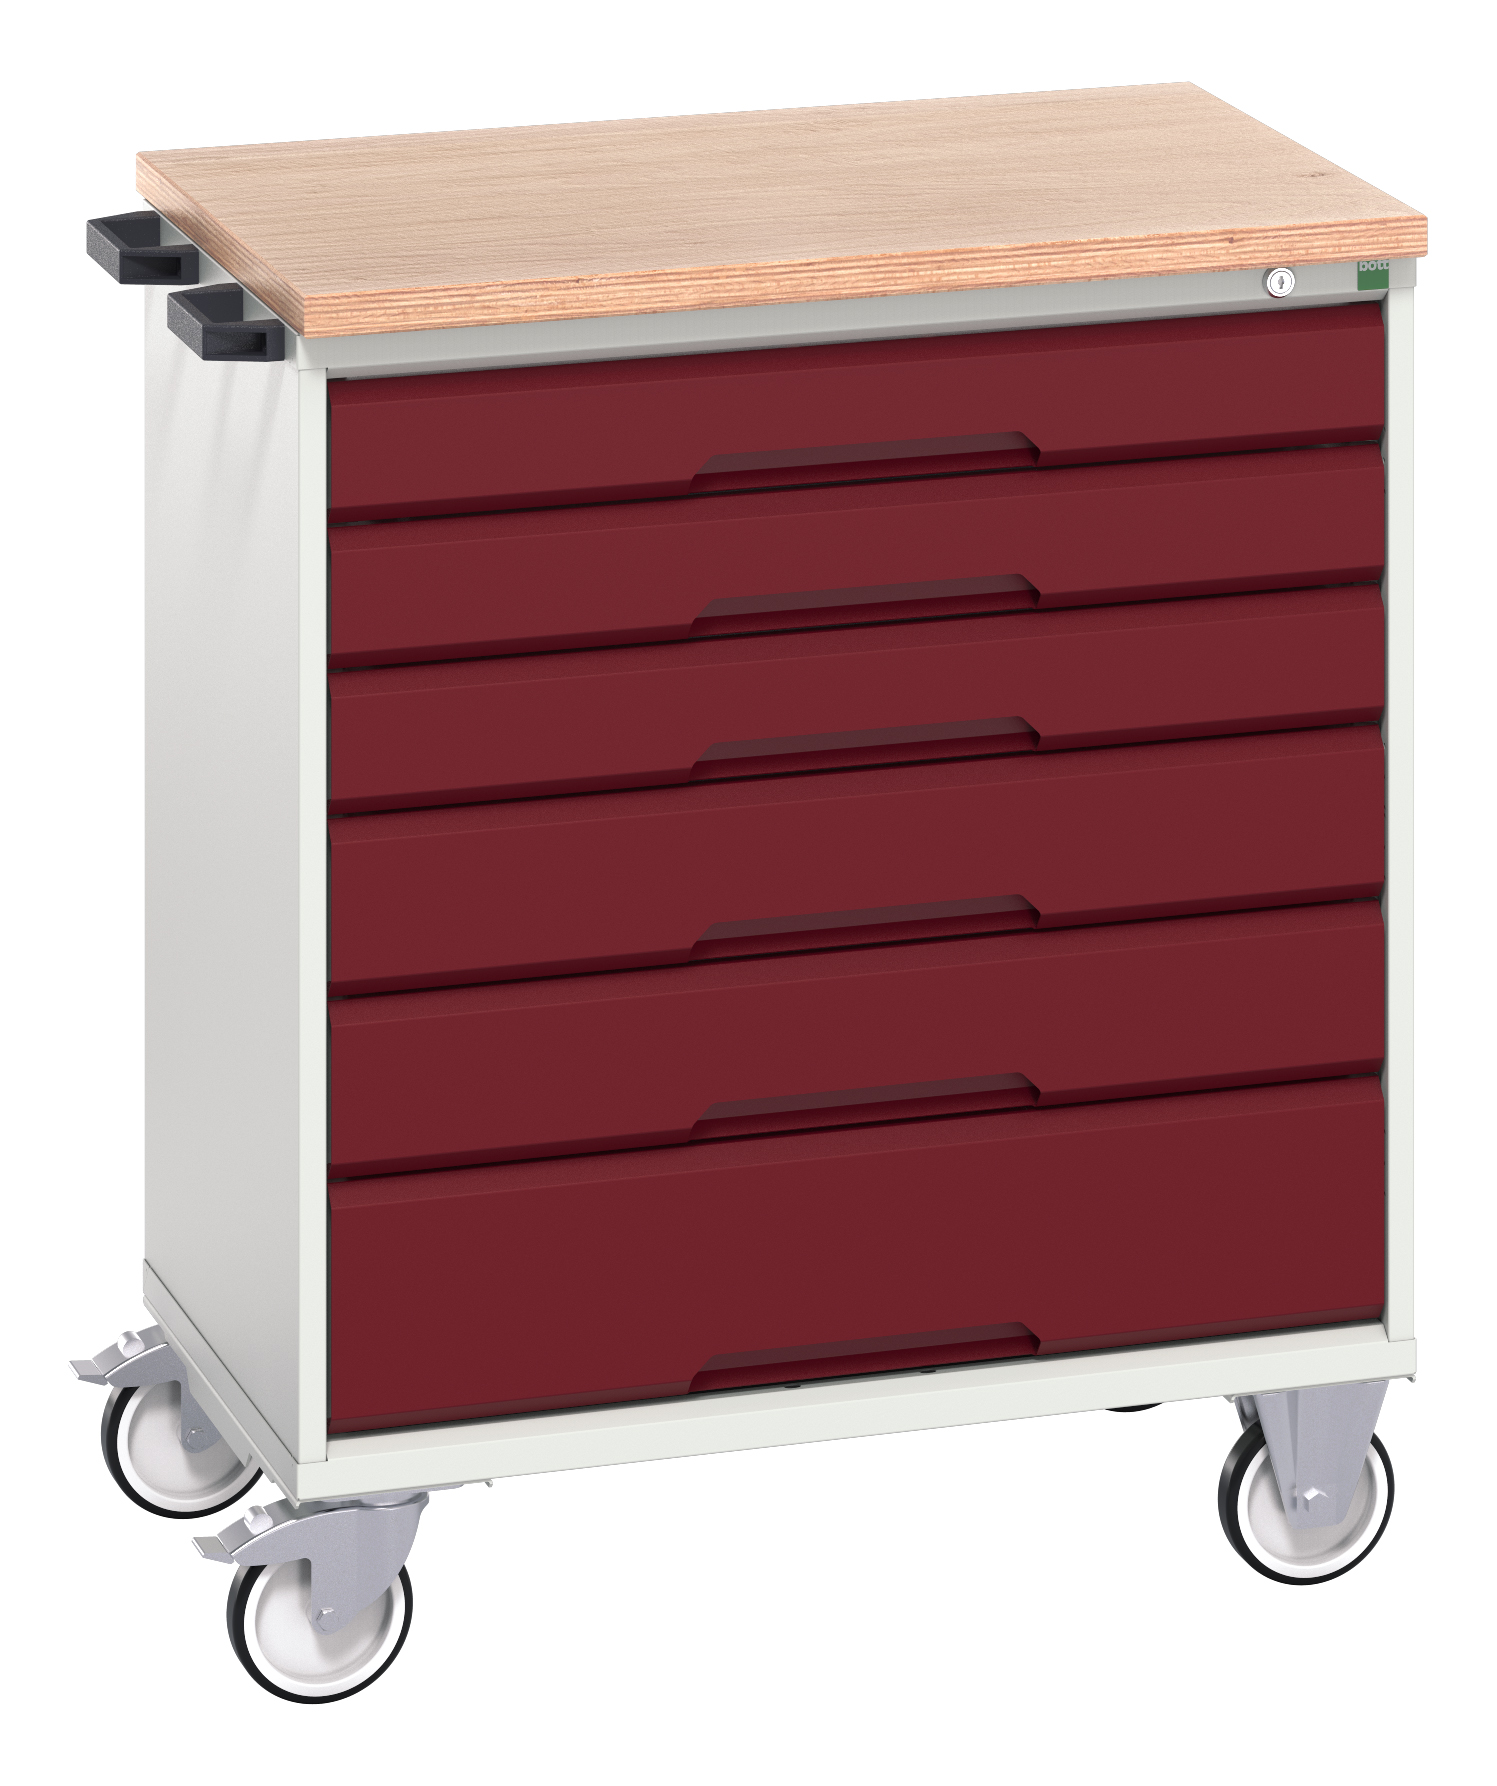 Bott Verso Mobile Drawer Cabinet With 6 Drawers & Multiplex Top - 16927004.24